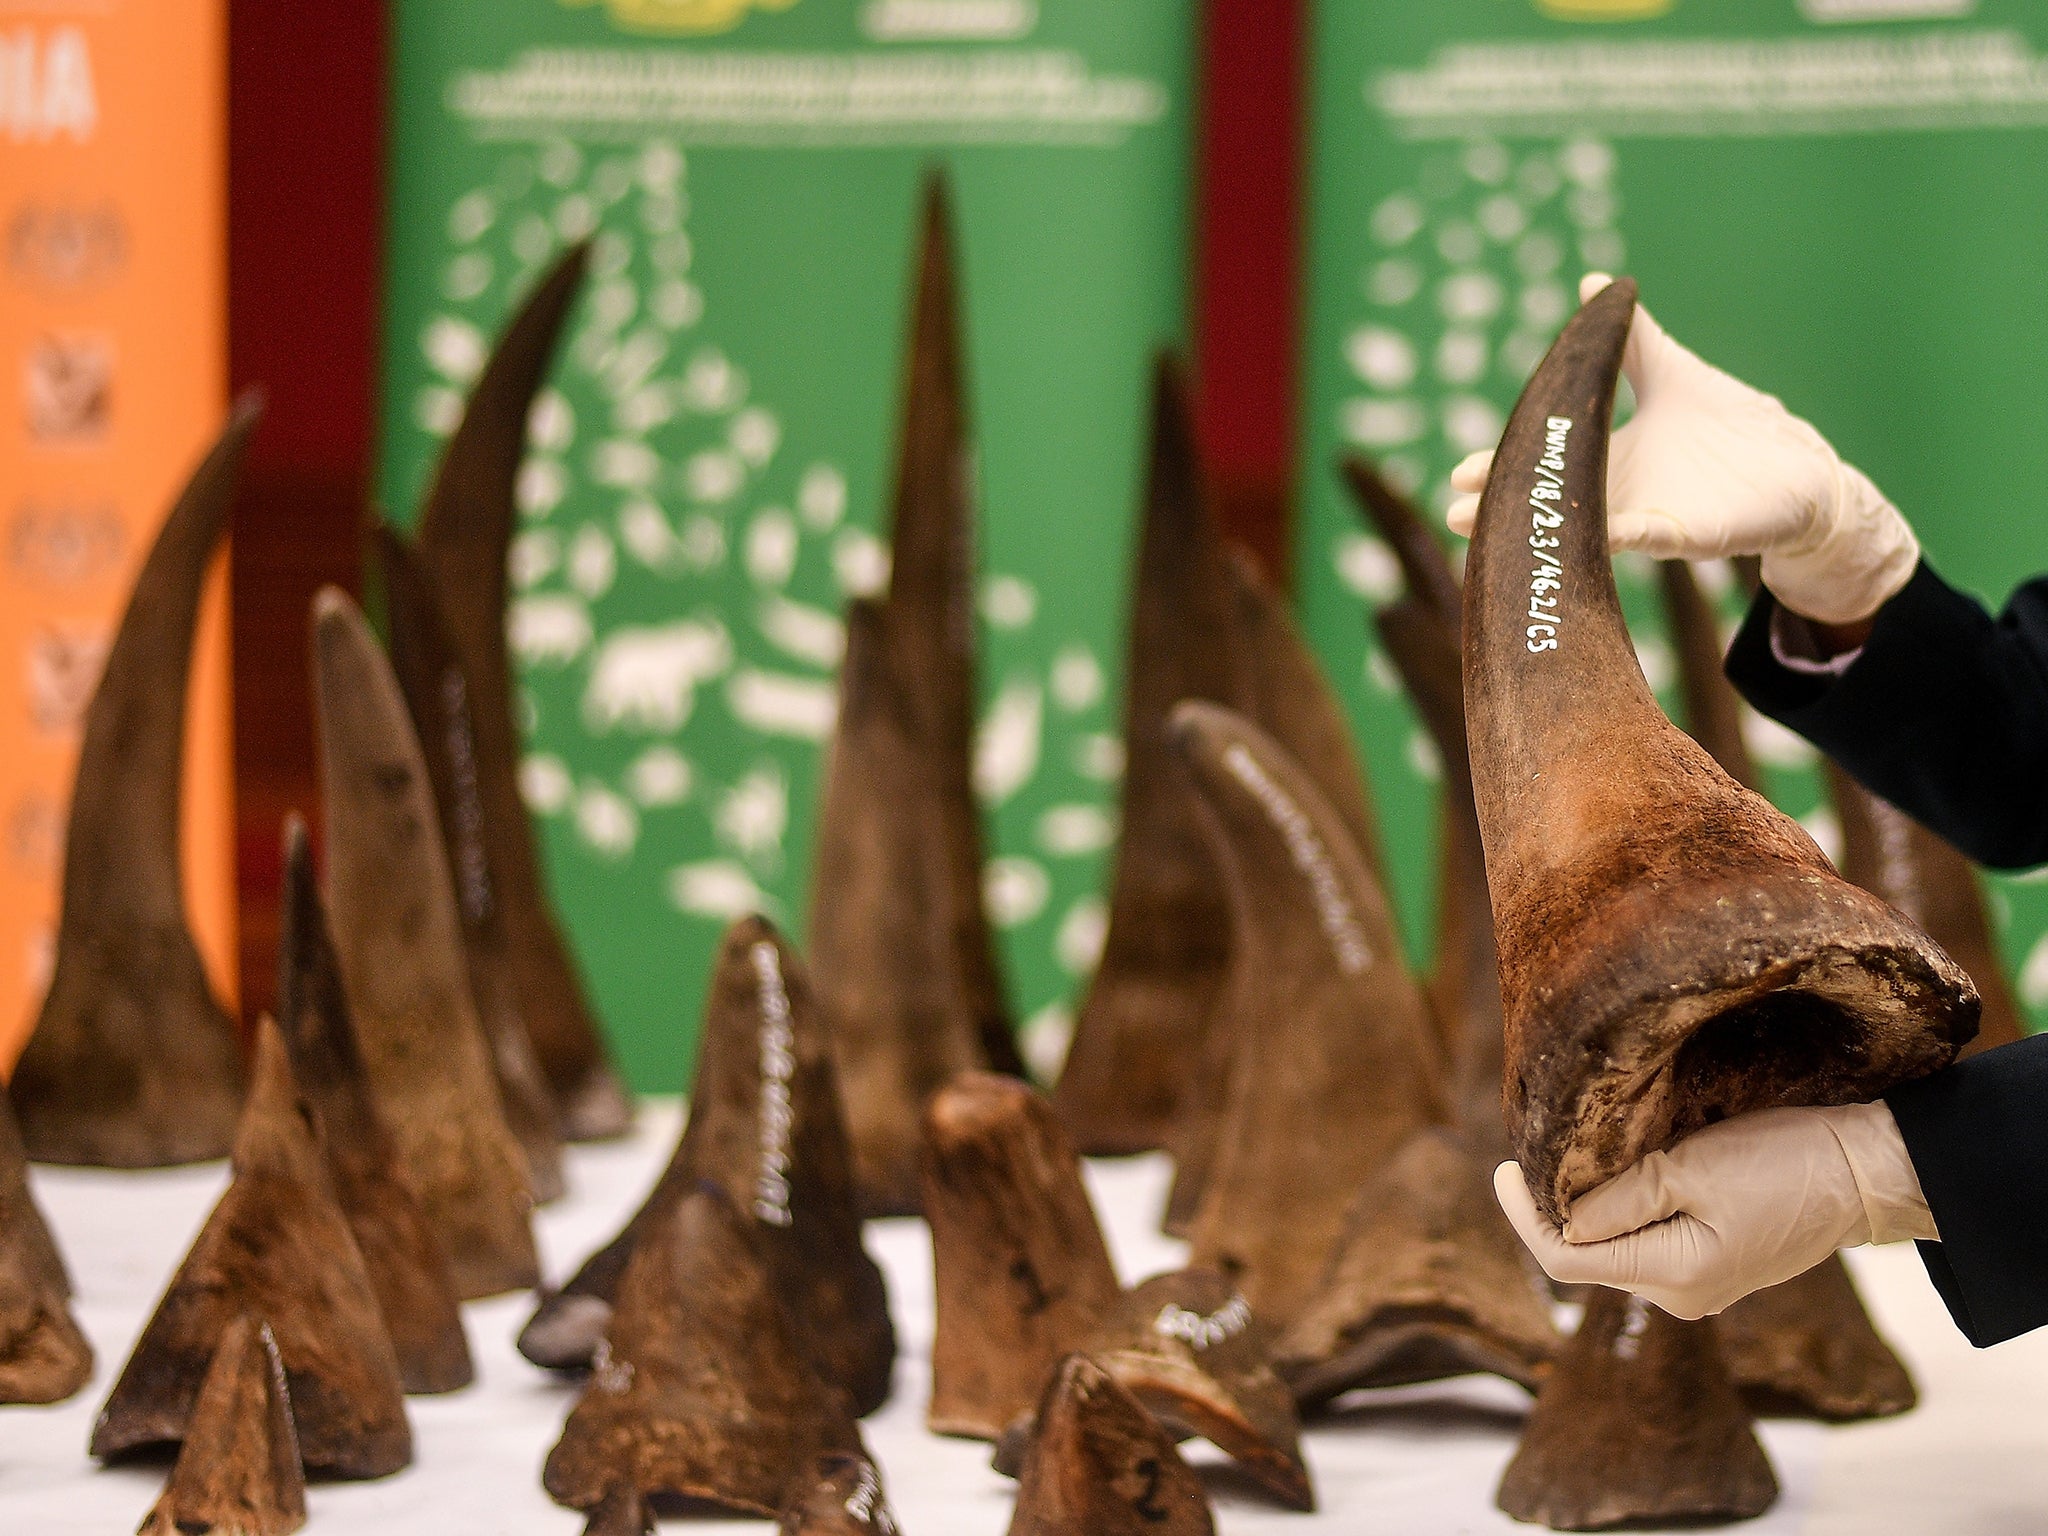 A Malaysian Wildlife official displays seized rhino horns and other animal parts at the Department of Wildlife and National Parks headquarters in Kuala Lumpur